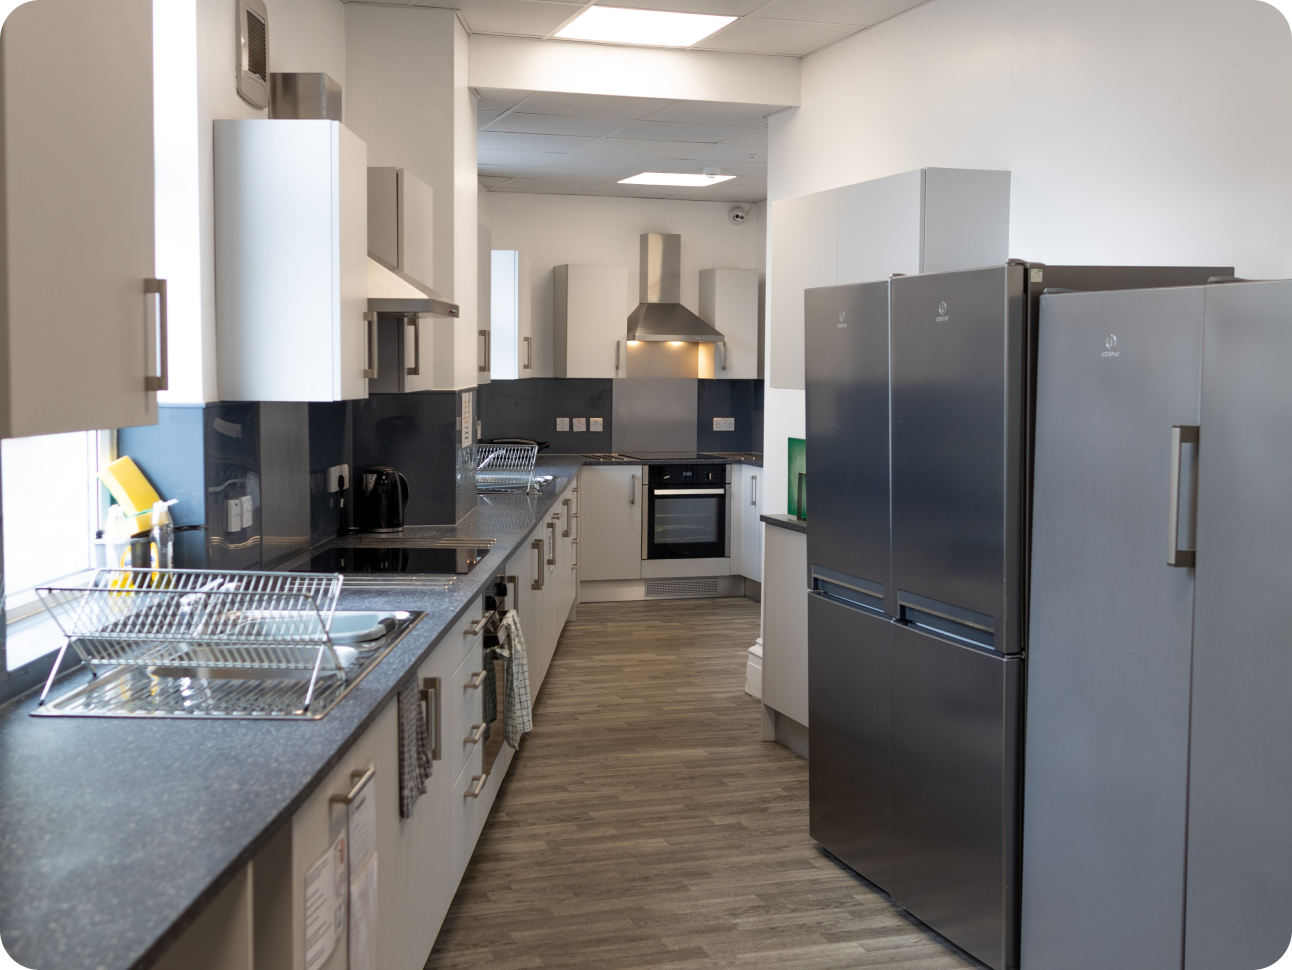 Silver and grey kitchen with appliances and wooden floor